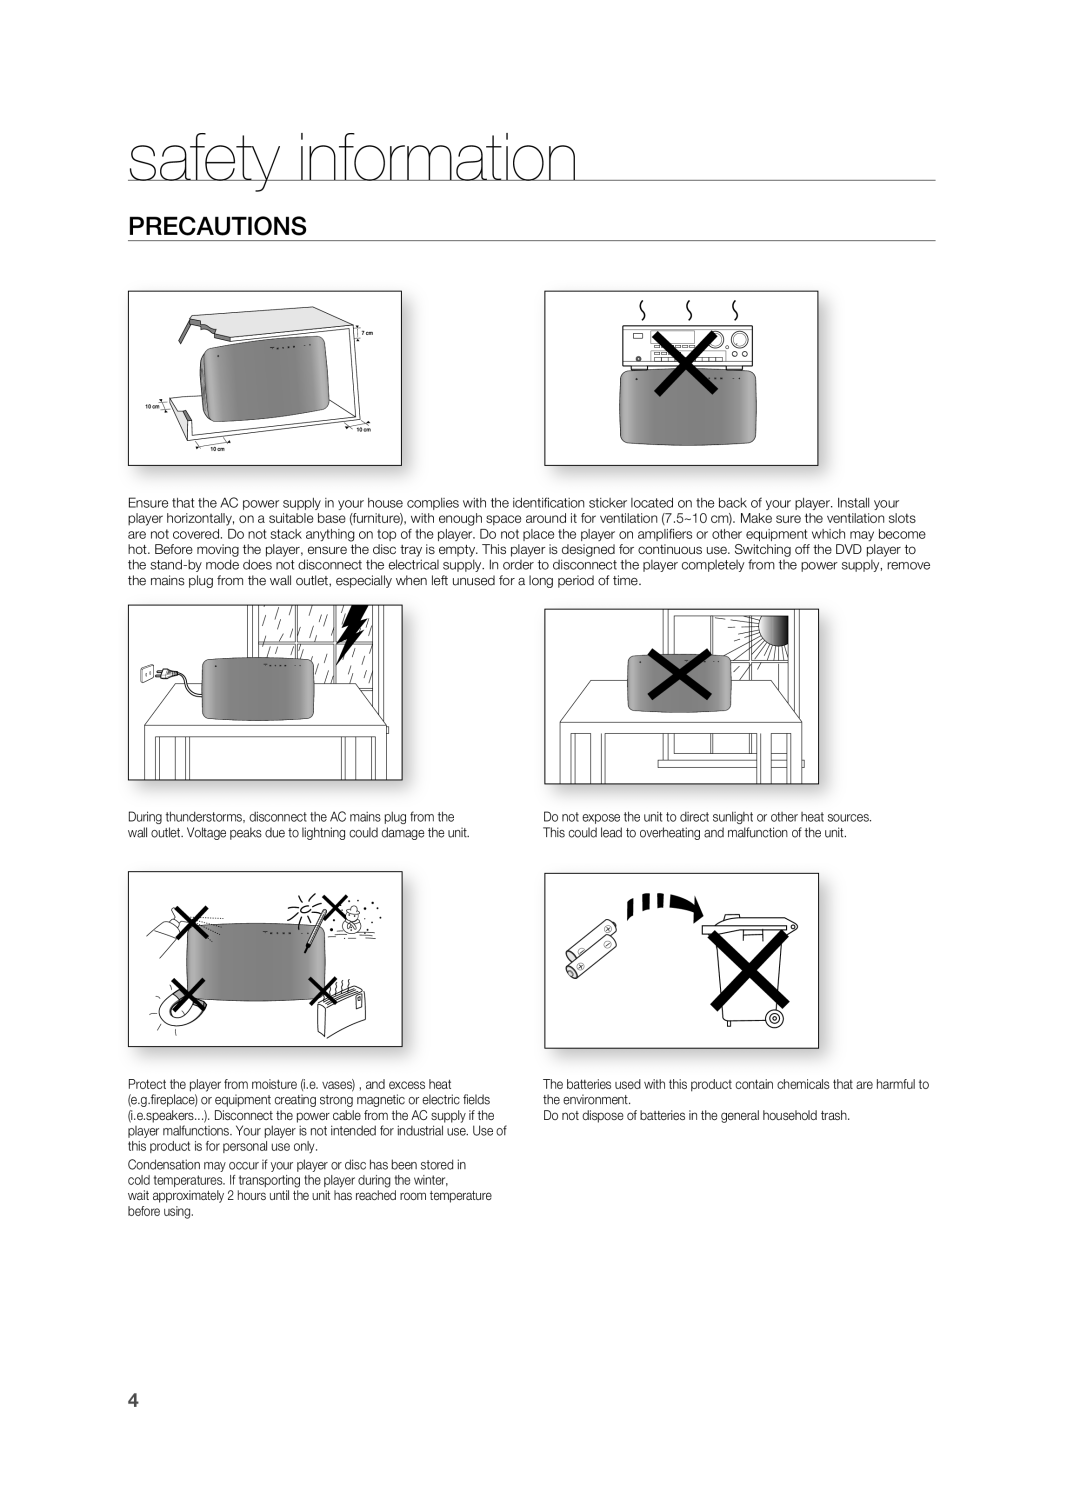 Samsung HT-X710 user manual PrECAUTIONS, safety information 